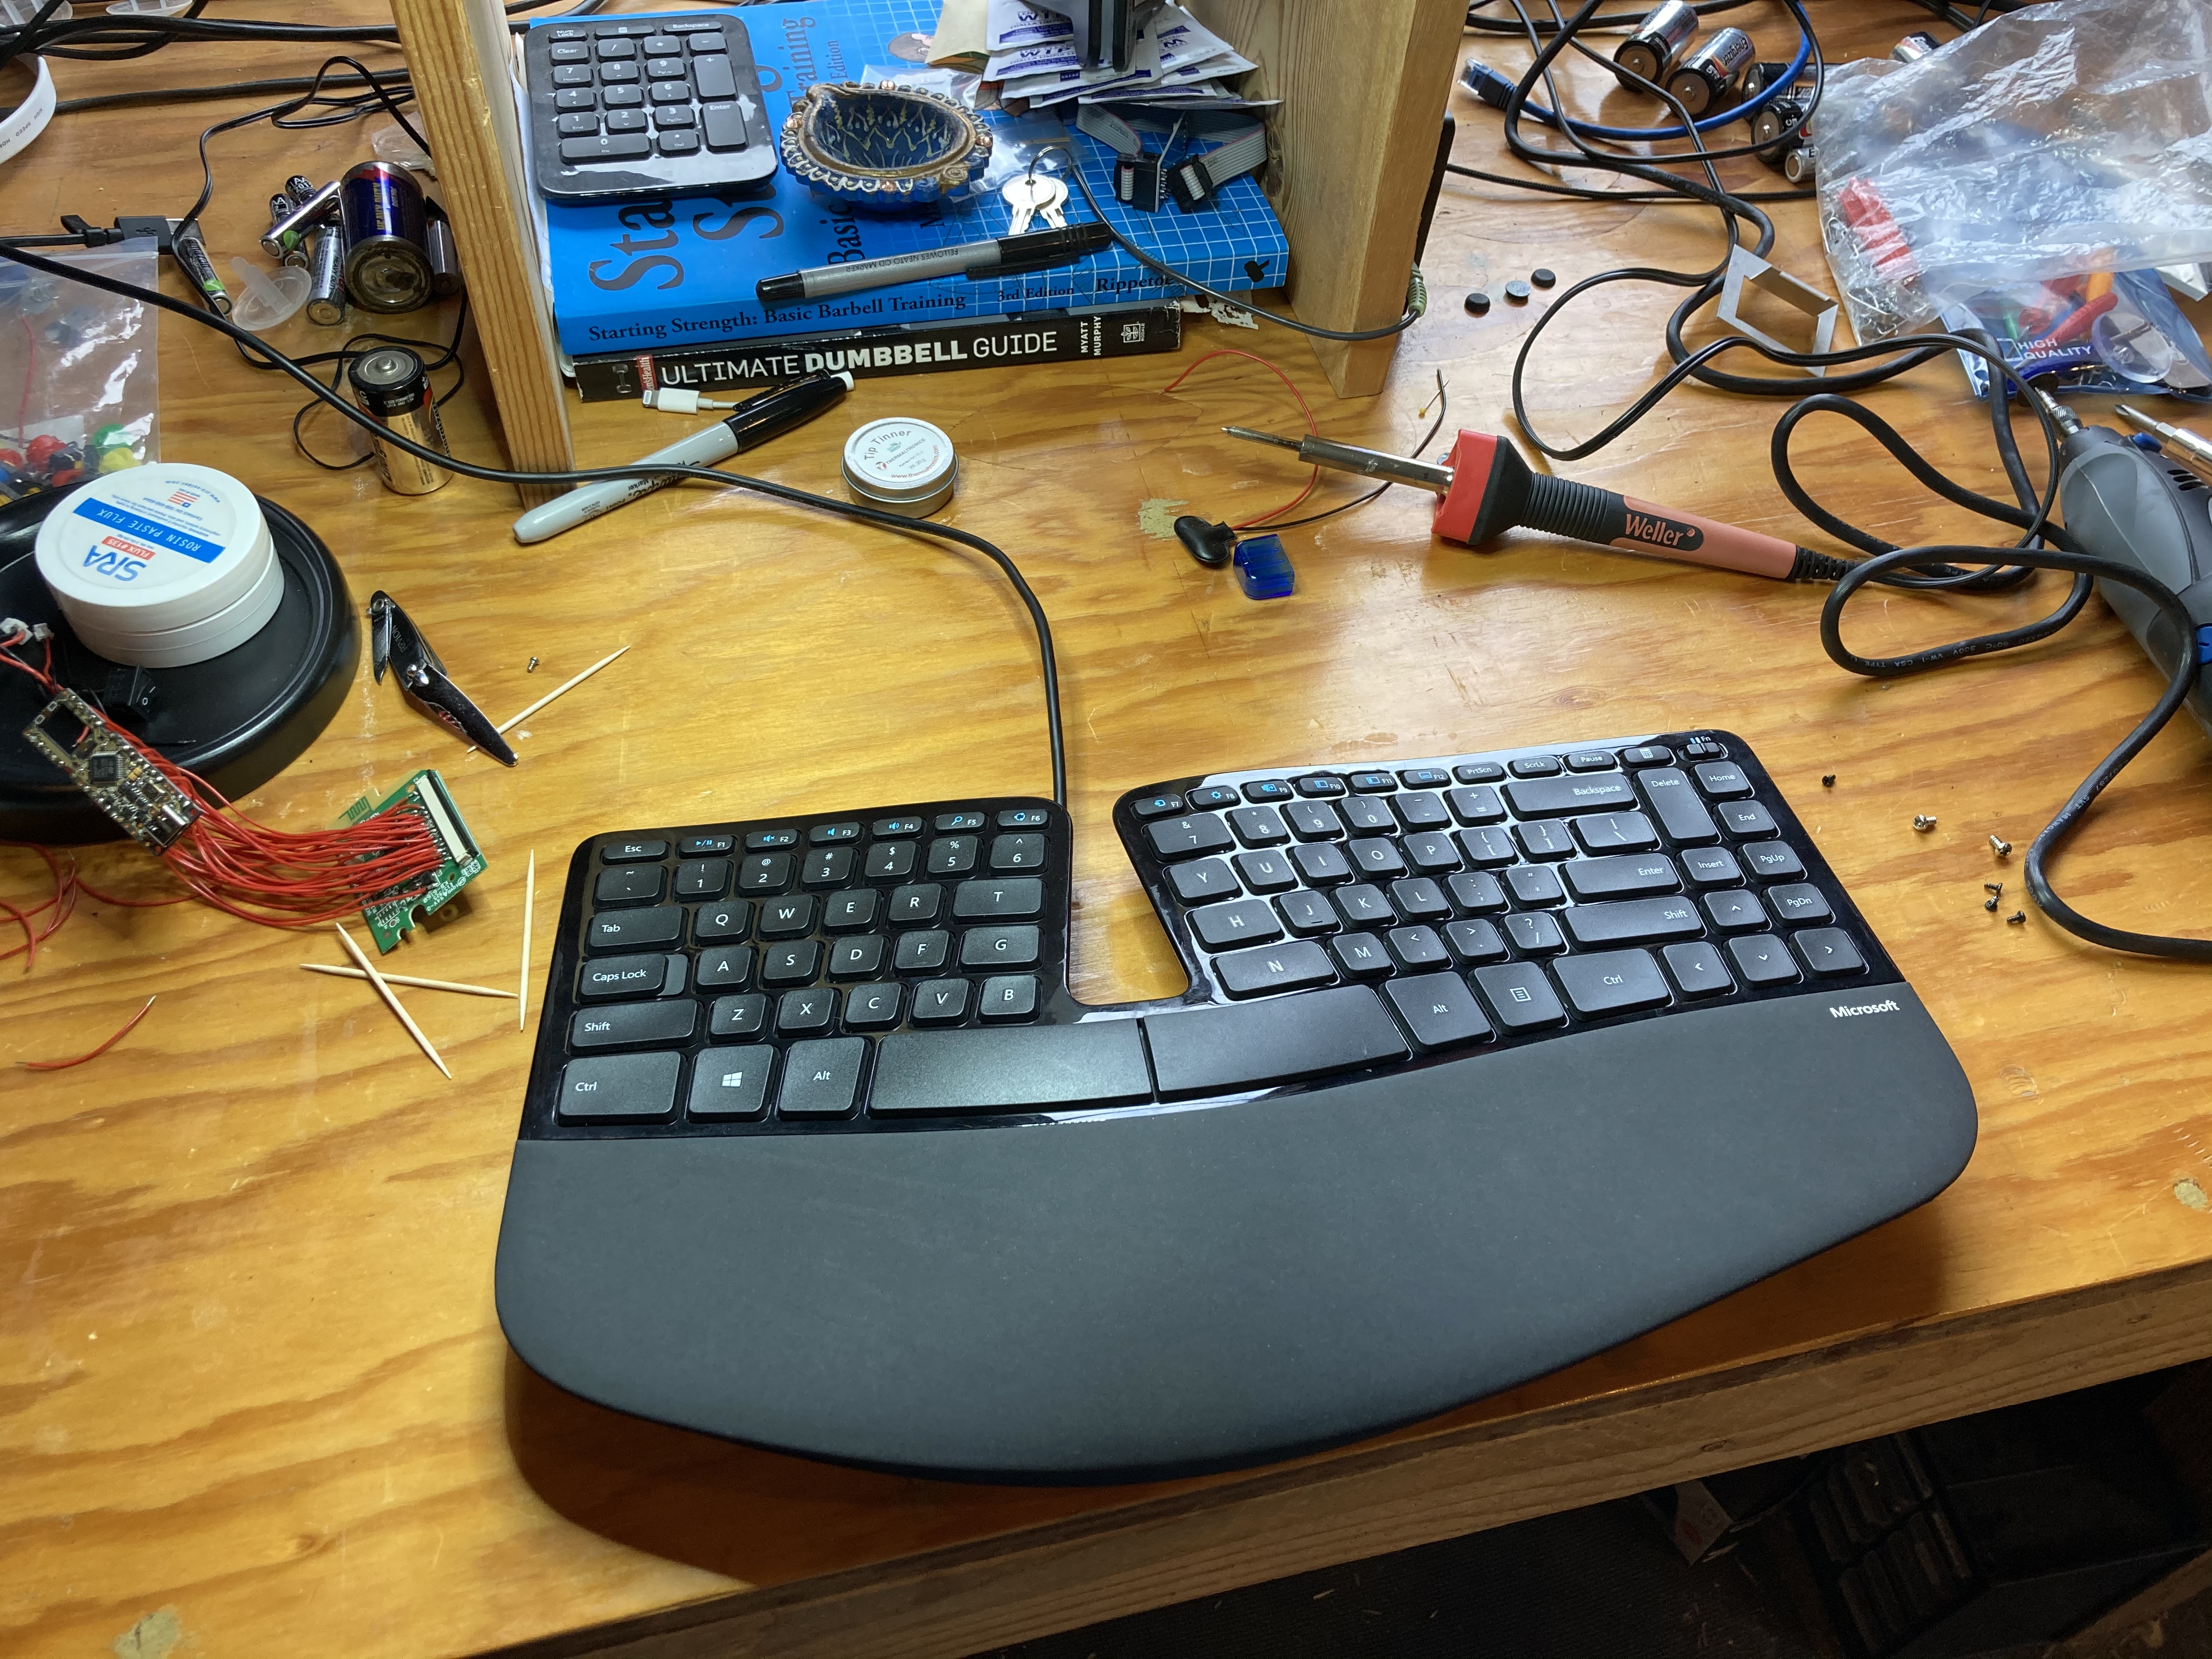 Wired keyboard and the resulting project mess!